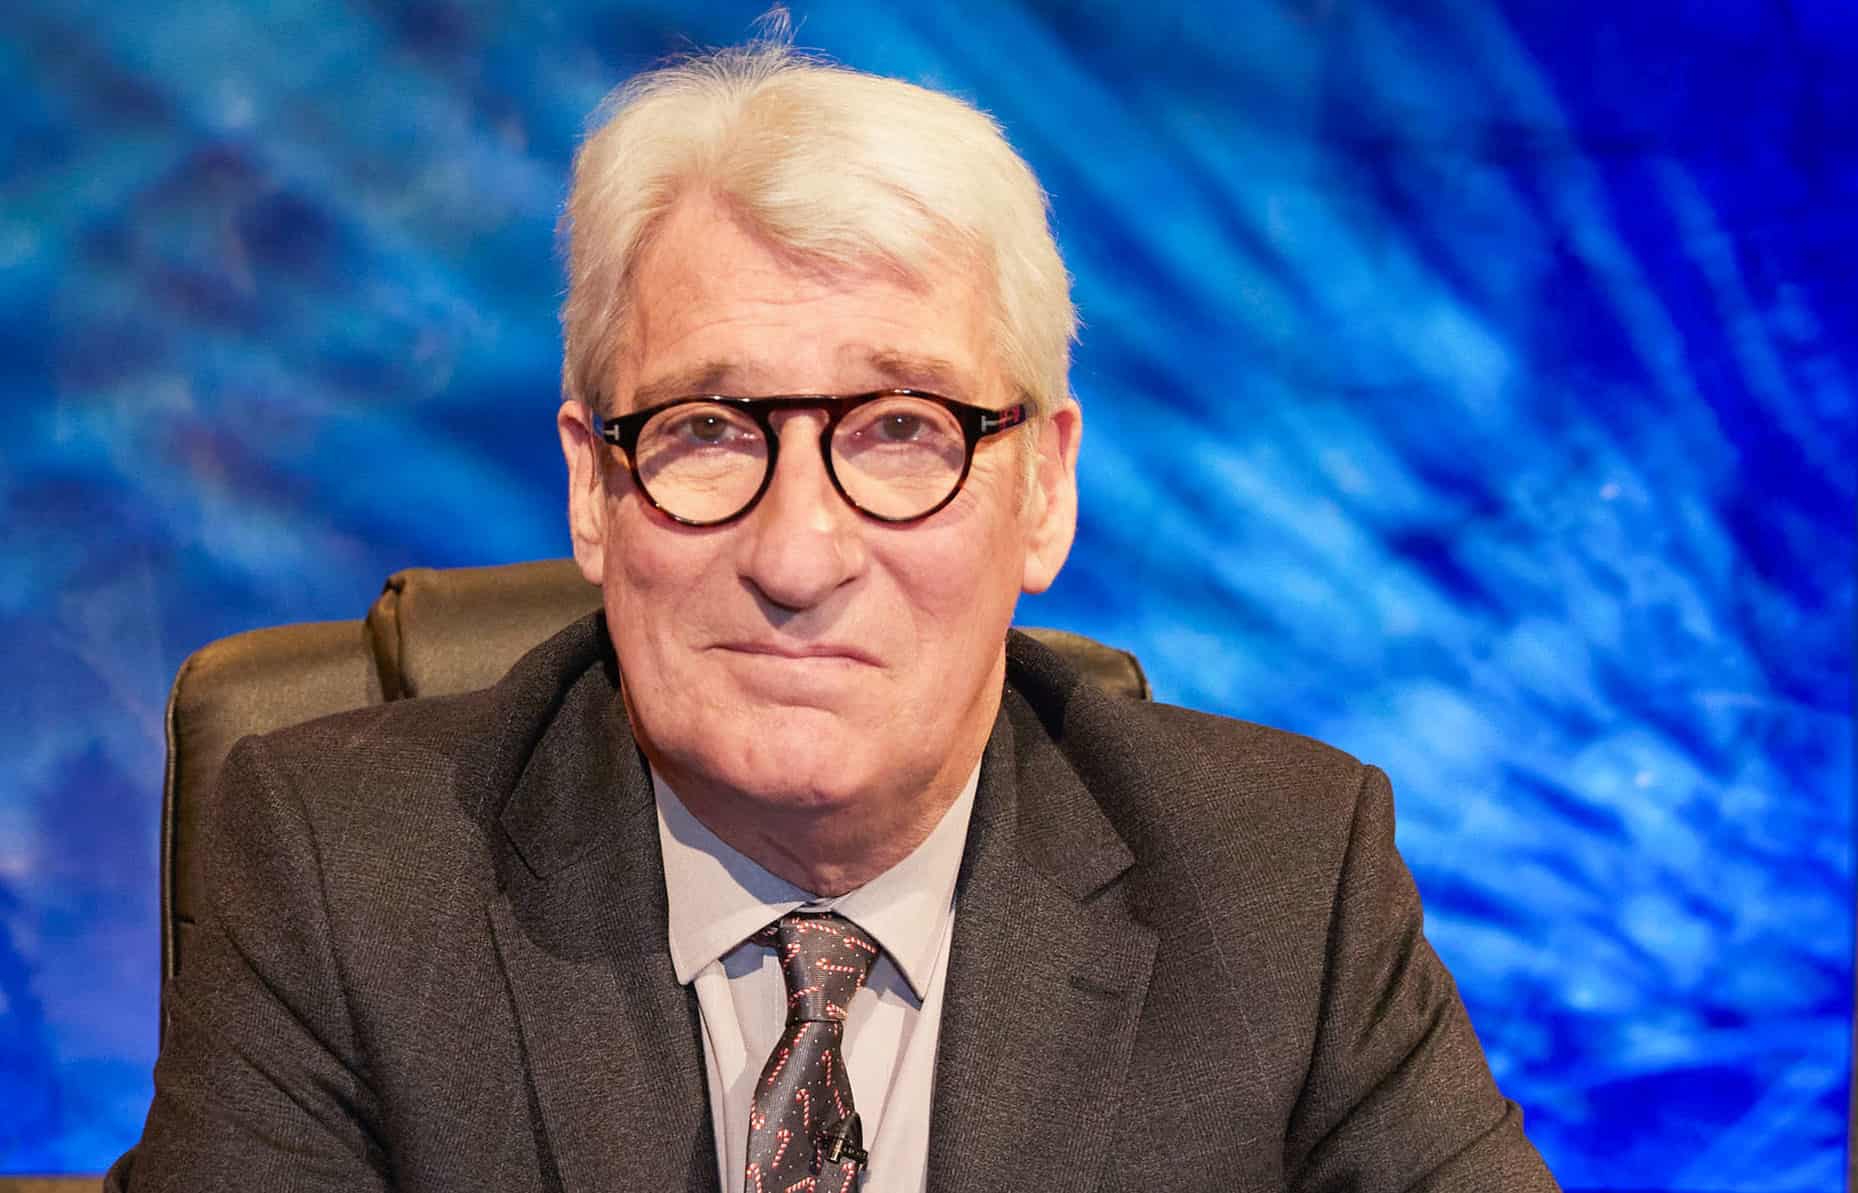 Emotional moment Paxman signs off University Challenge for the last time